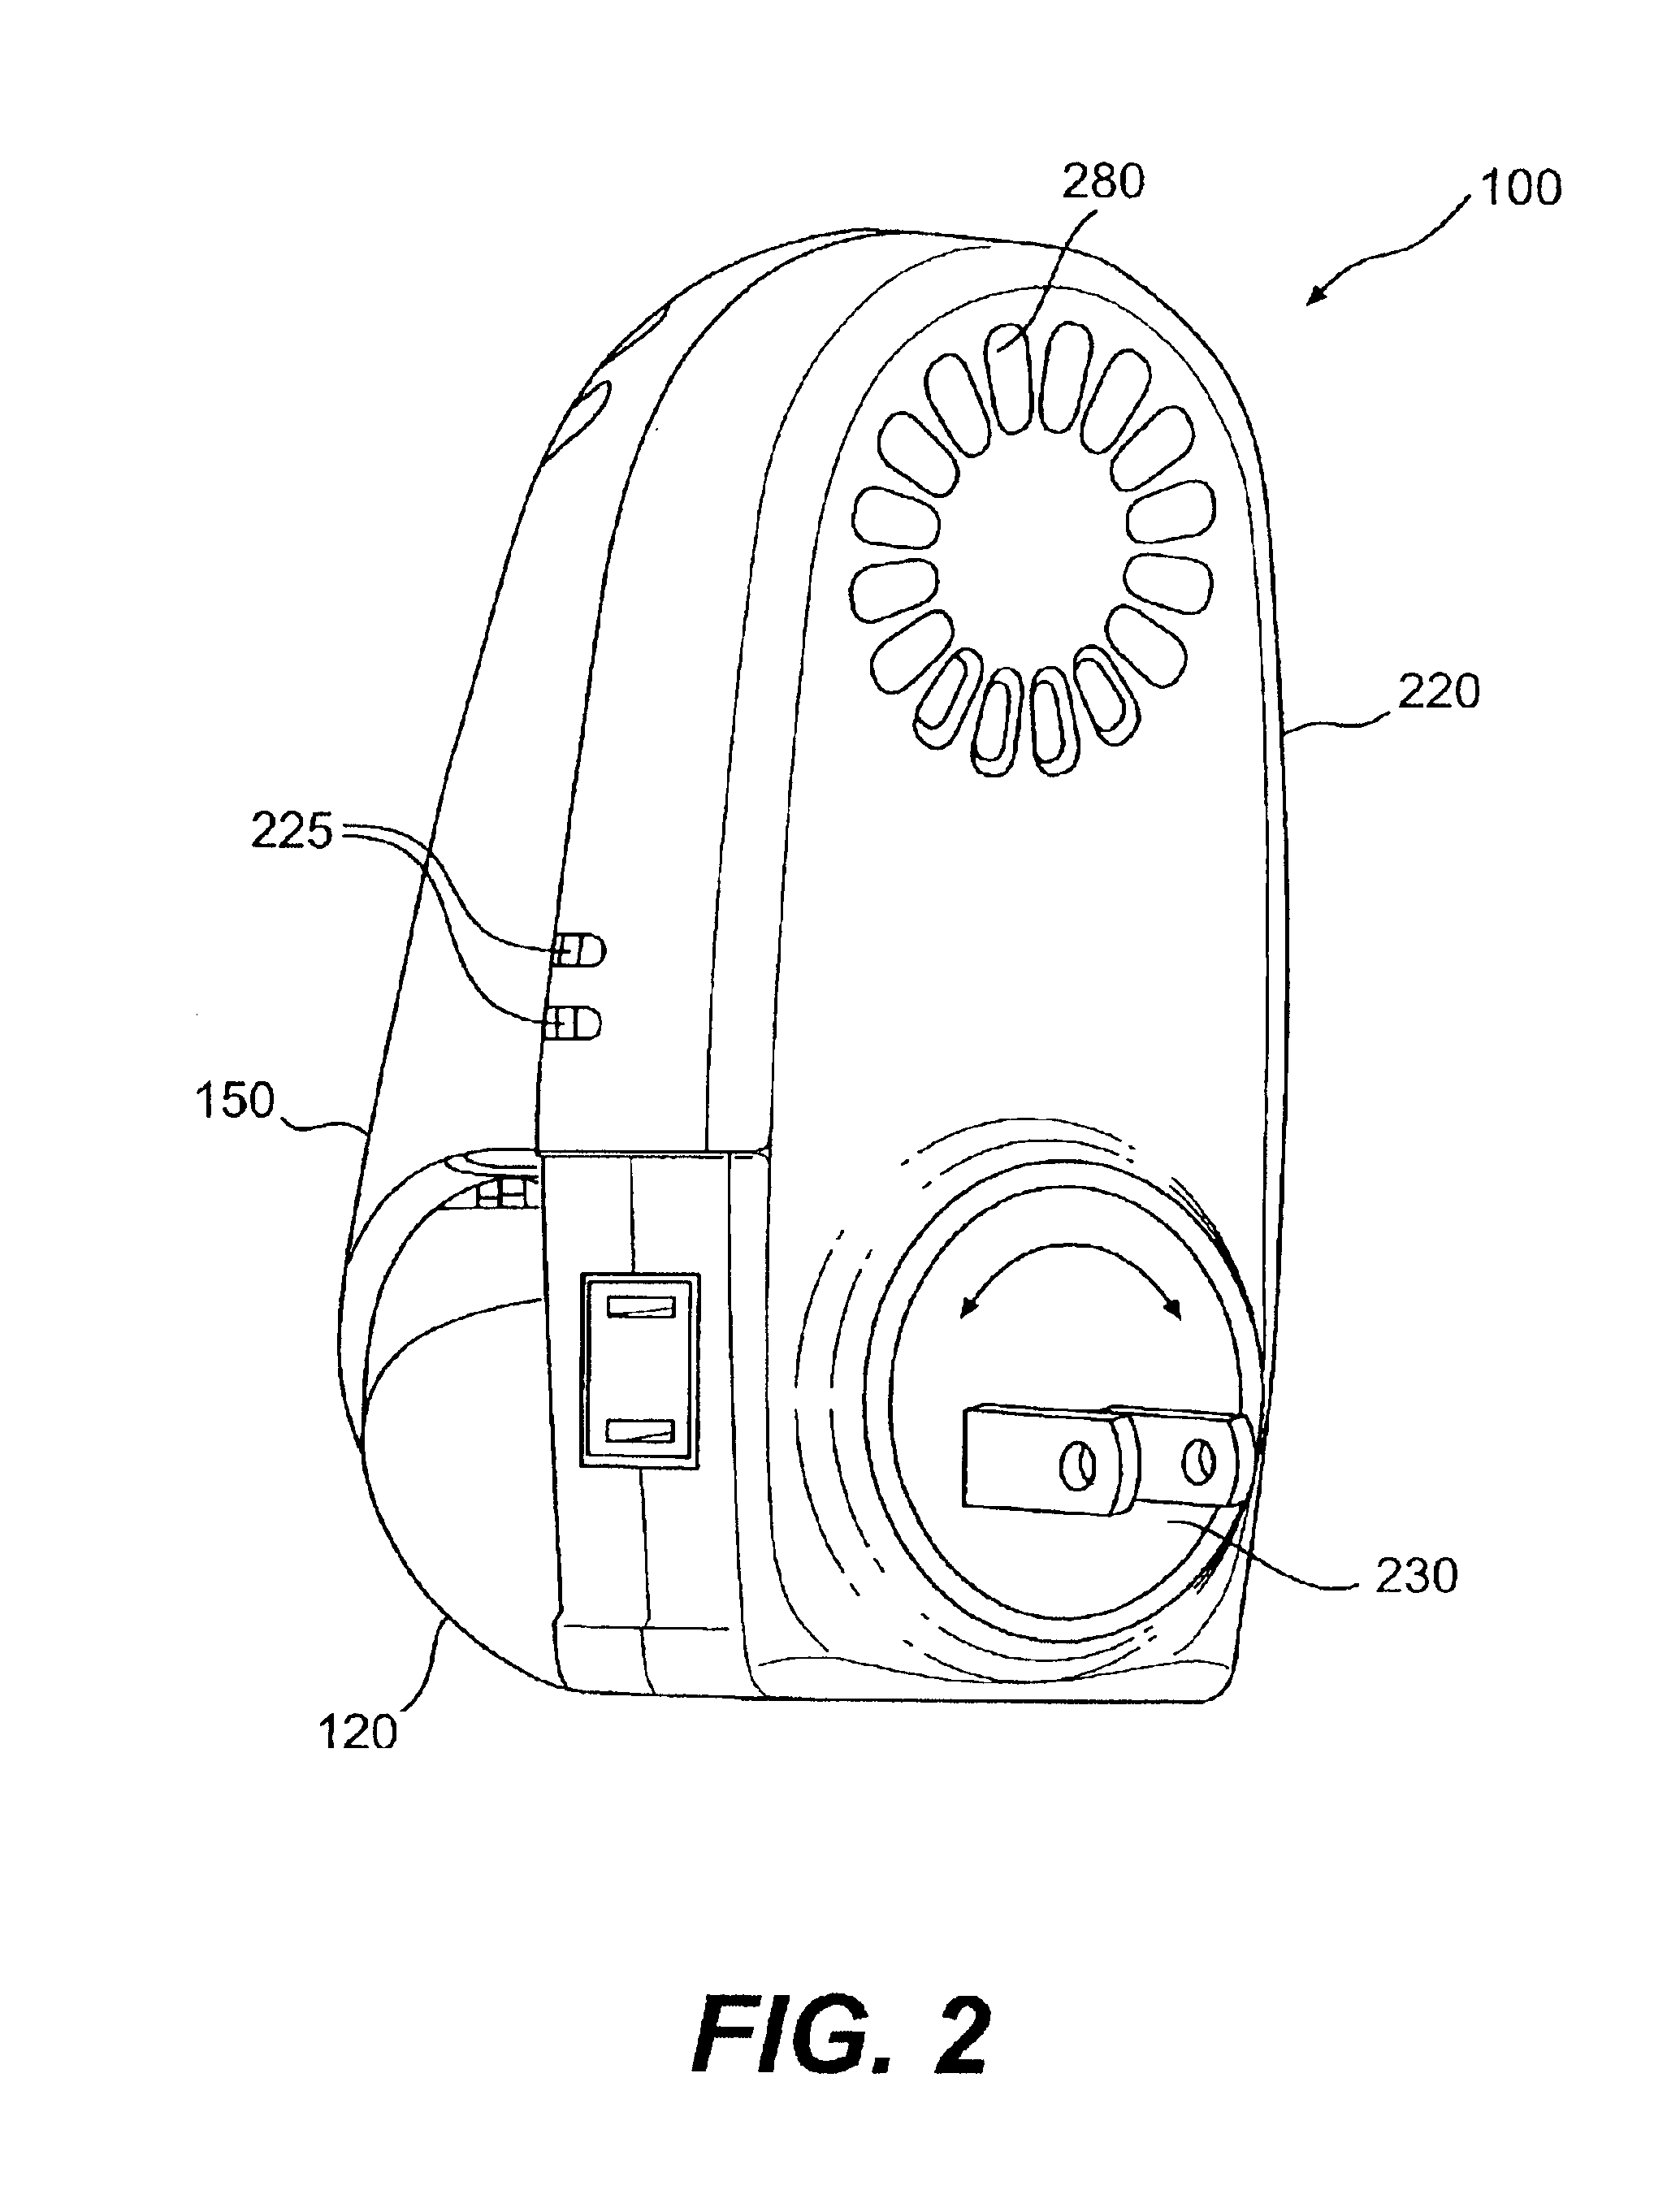 Electrical evaporator with adjustable evaporation intensity